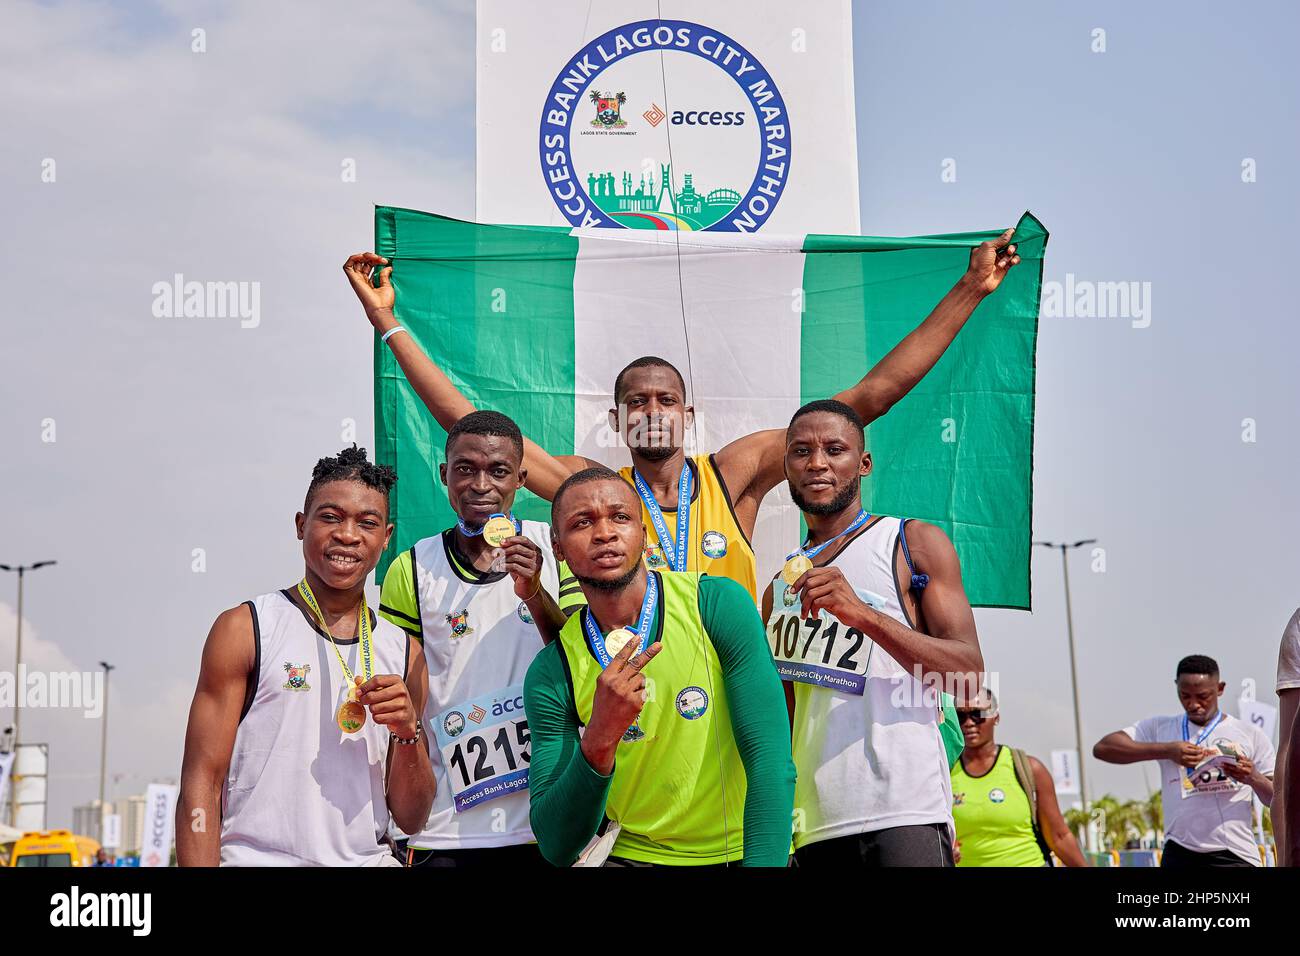 Athletes pose for photographs after competing in the Access Bank Lagos City Marathon, on February 12, 2022. Stock Photo